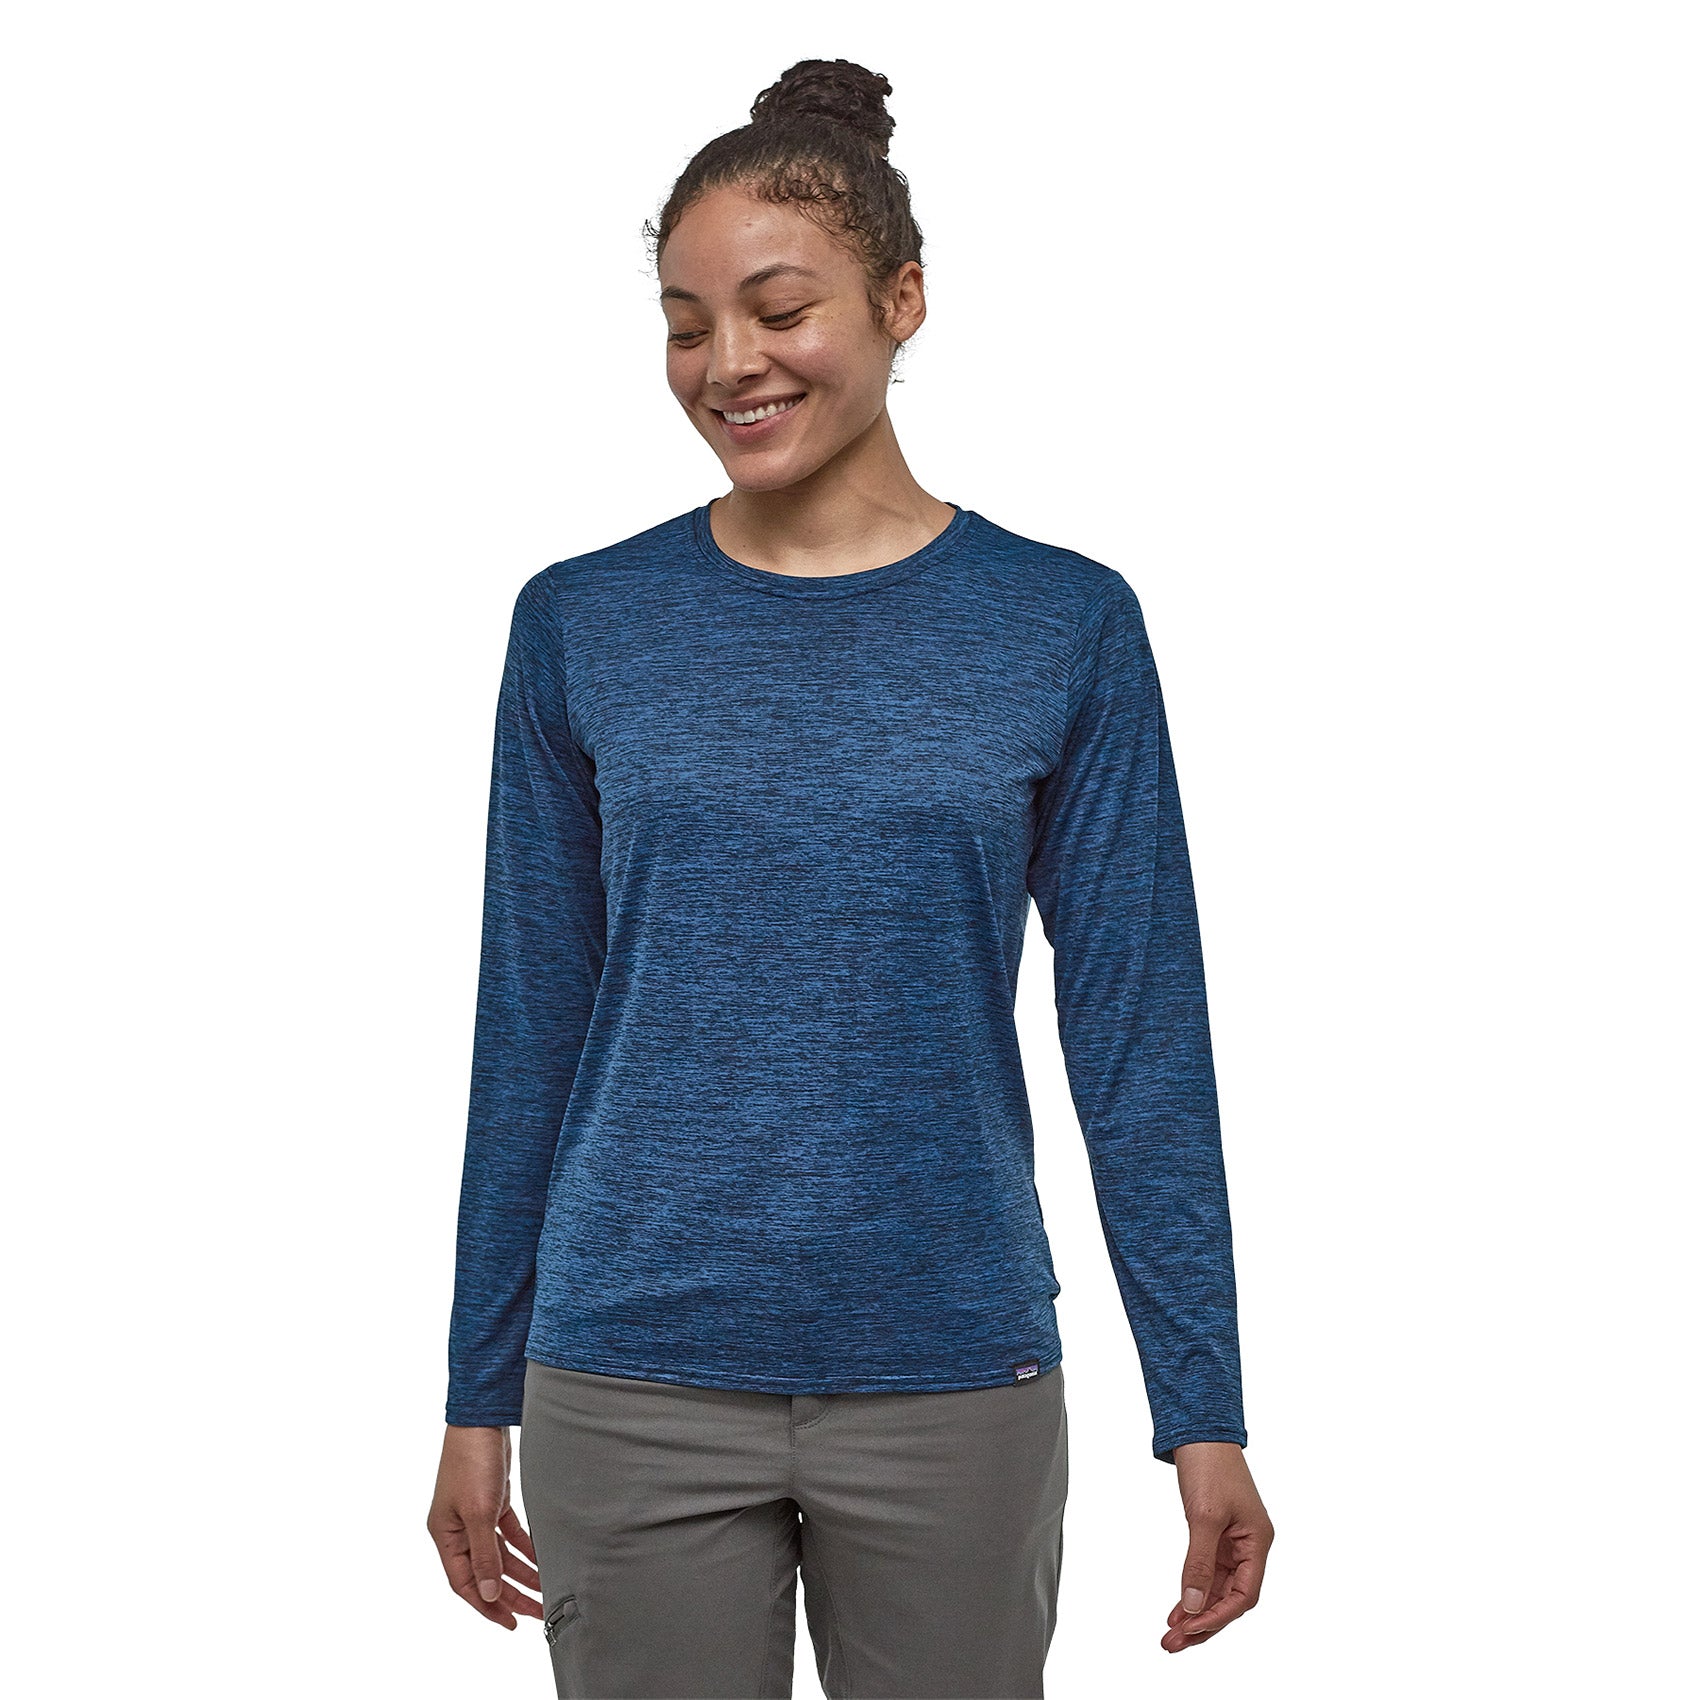 patagonia womens long sleeve capilene daily shirt in viking blue - navy blue x dye, front view on a model